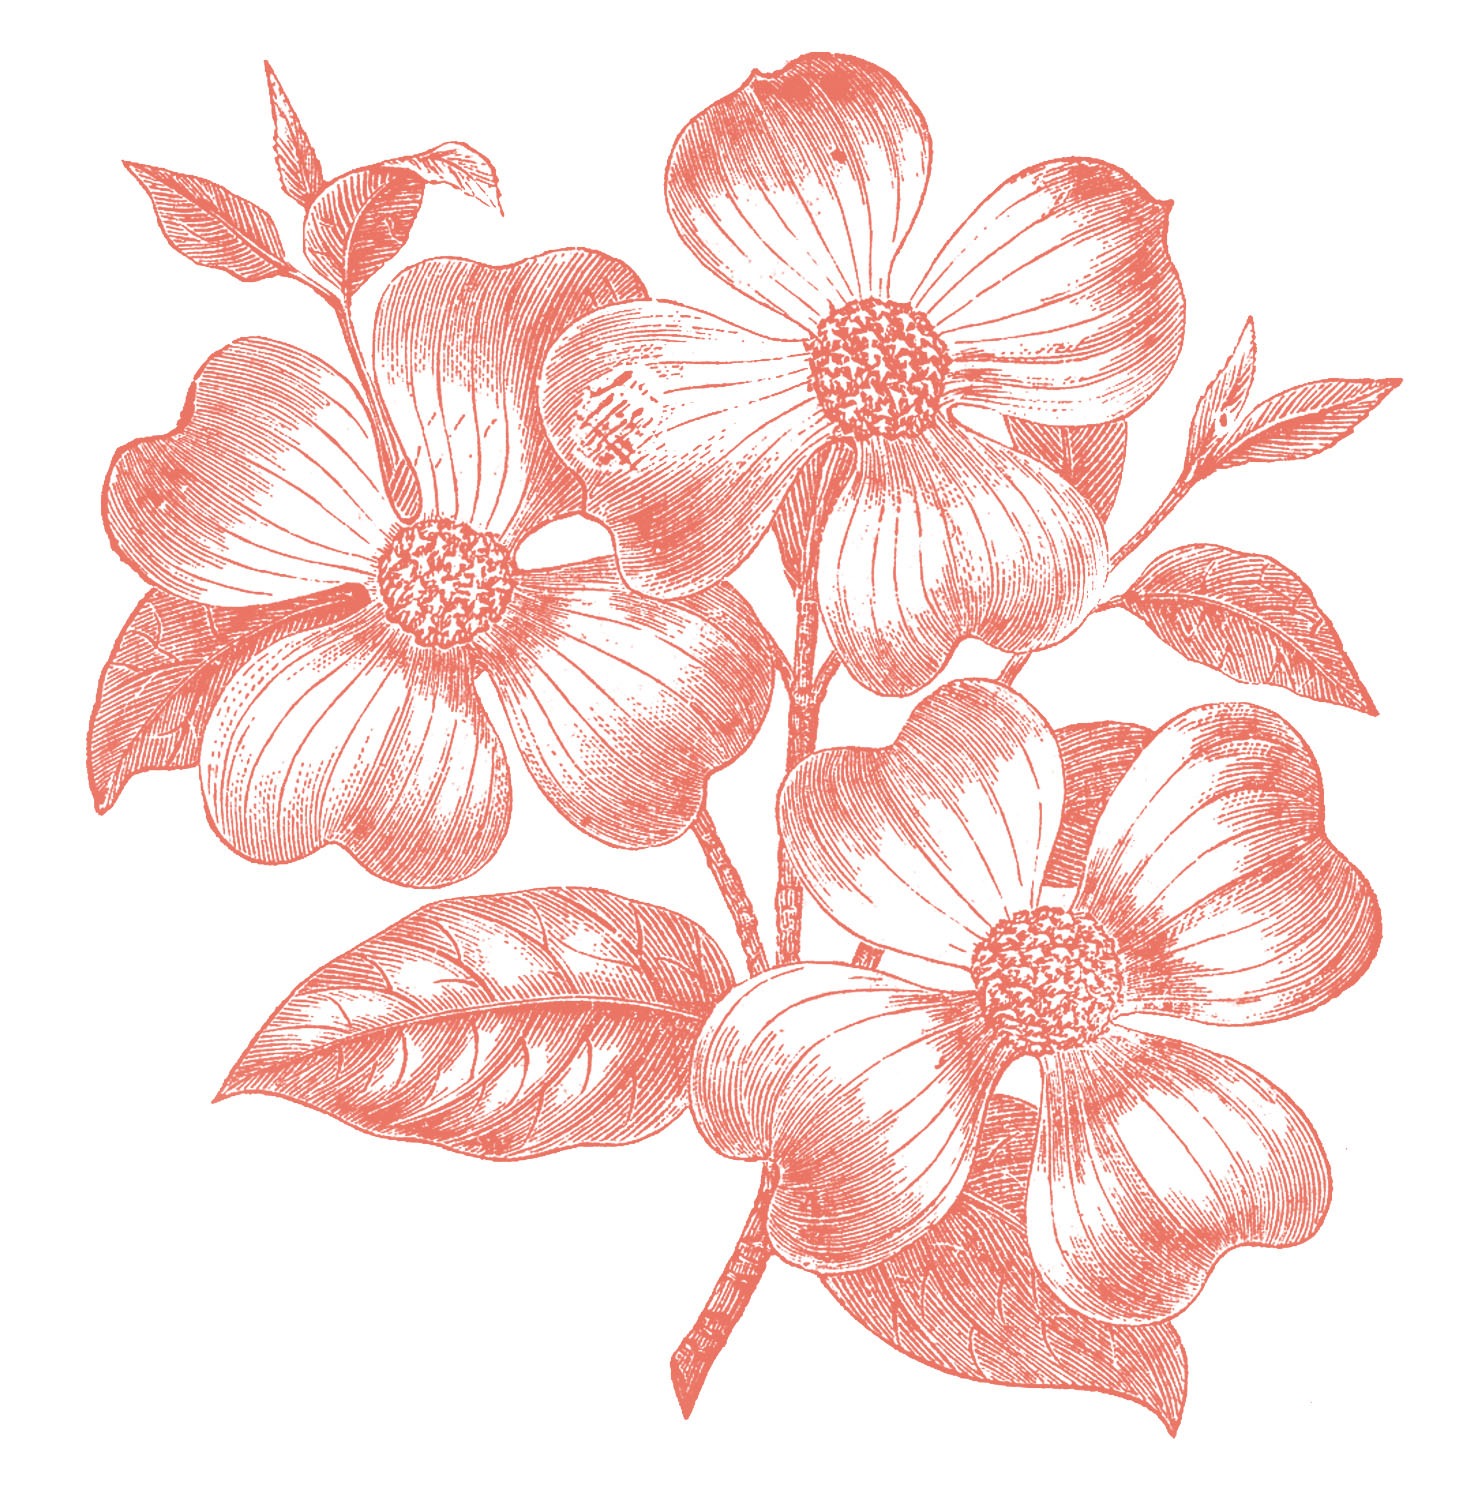 Free Vintage Images - Dogwood Flowers - 2 colors - The Graphics Fairy